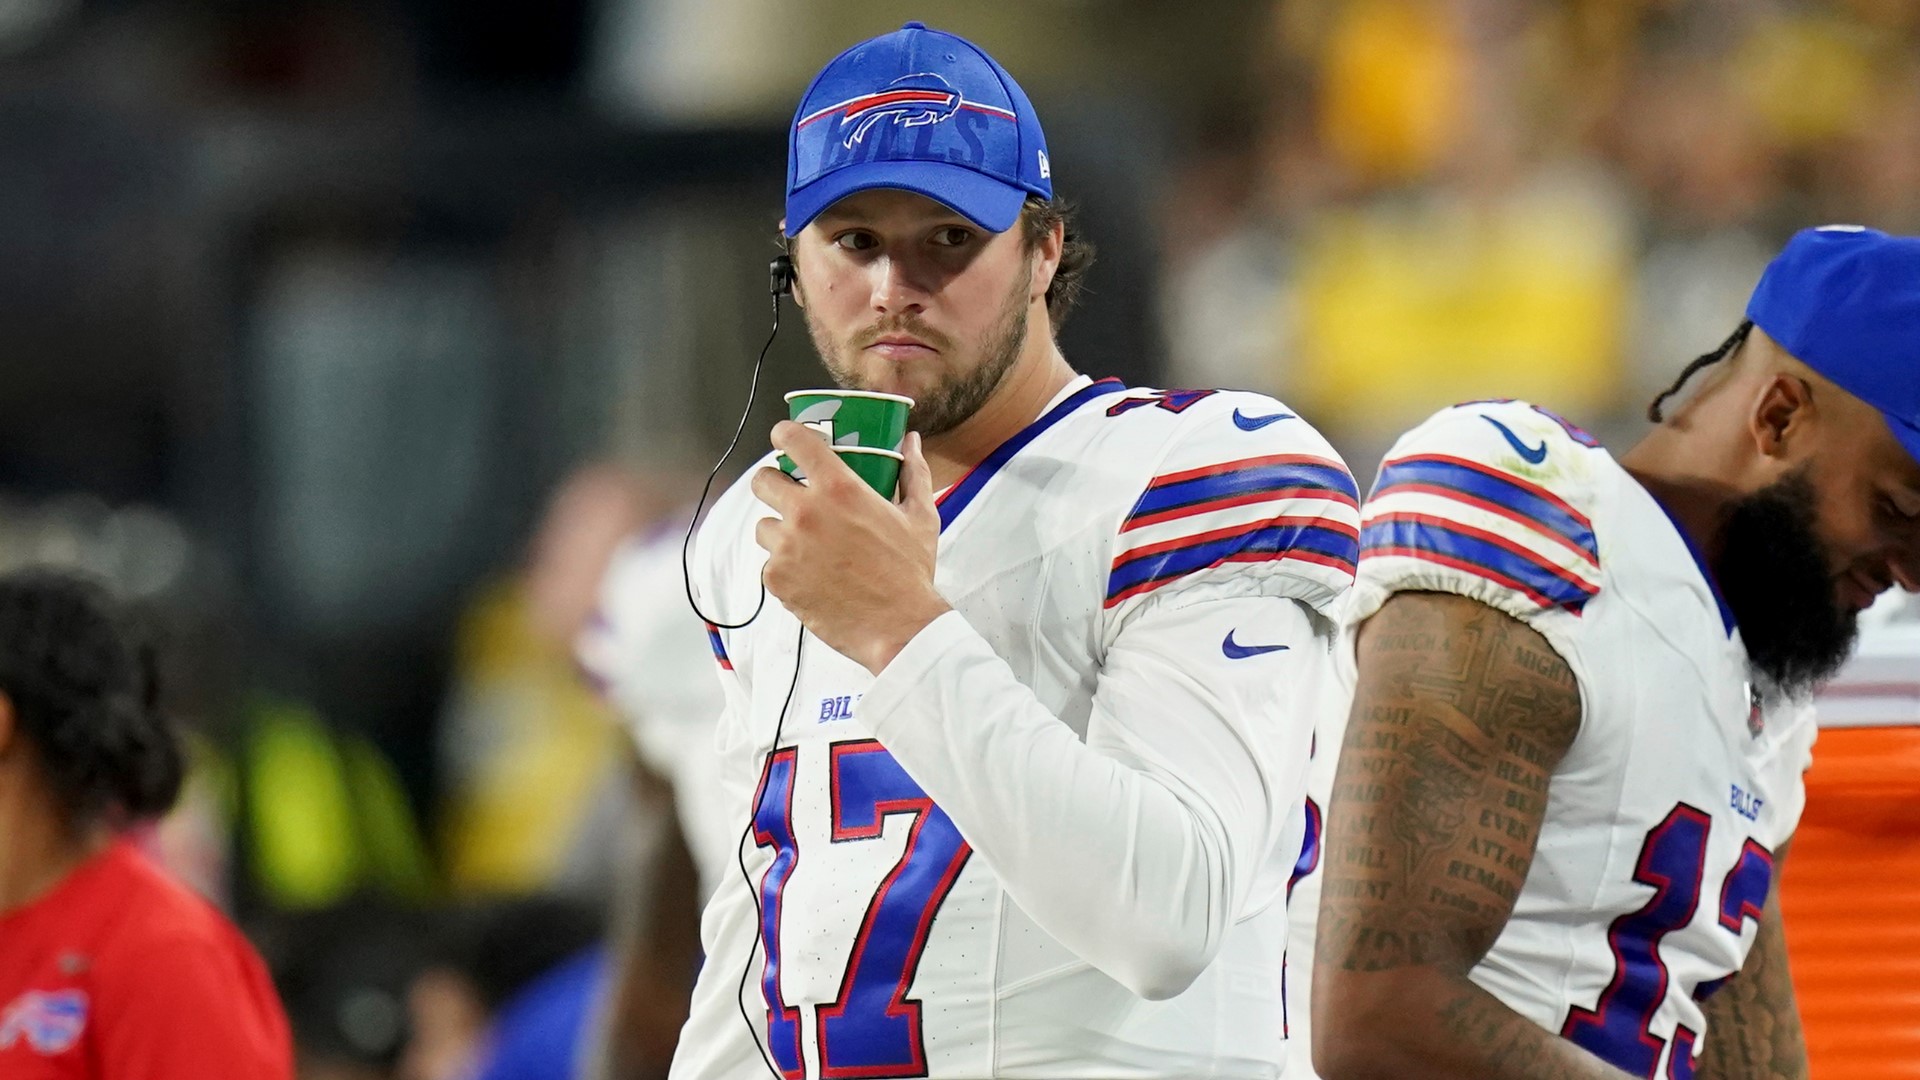 The Buffalo Bills added quite a bit to its offense over the offseason, providing Josh Allen and Ken Dorsey more options to incorporate. How do all the pieces fit?